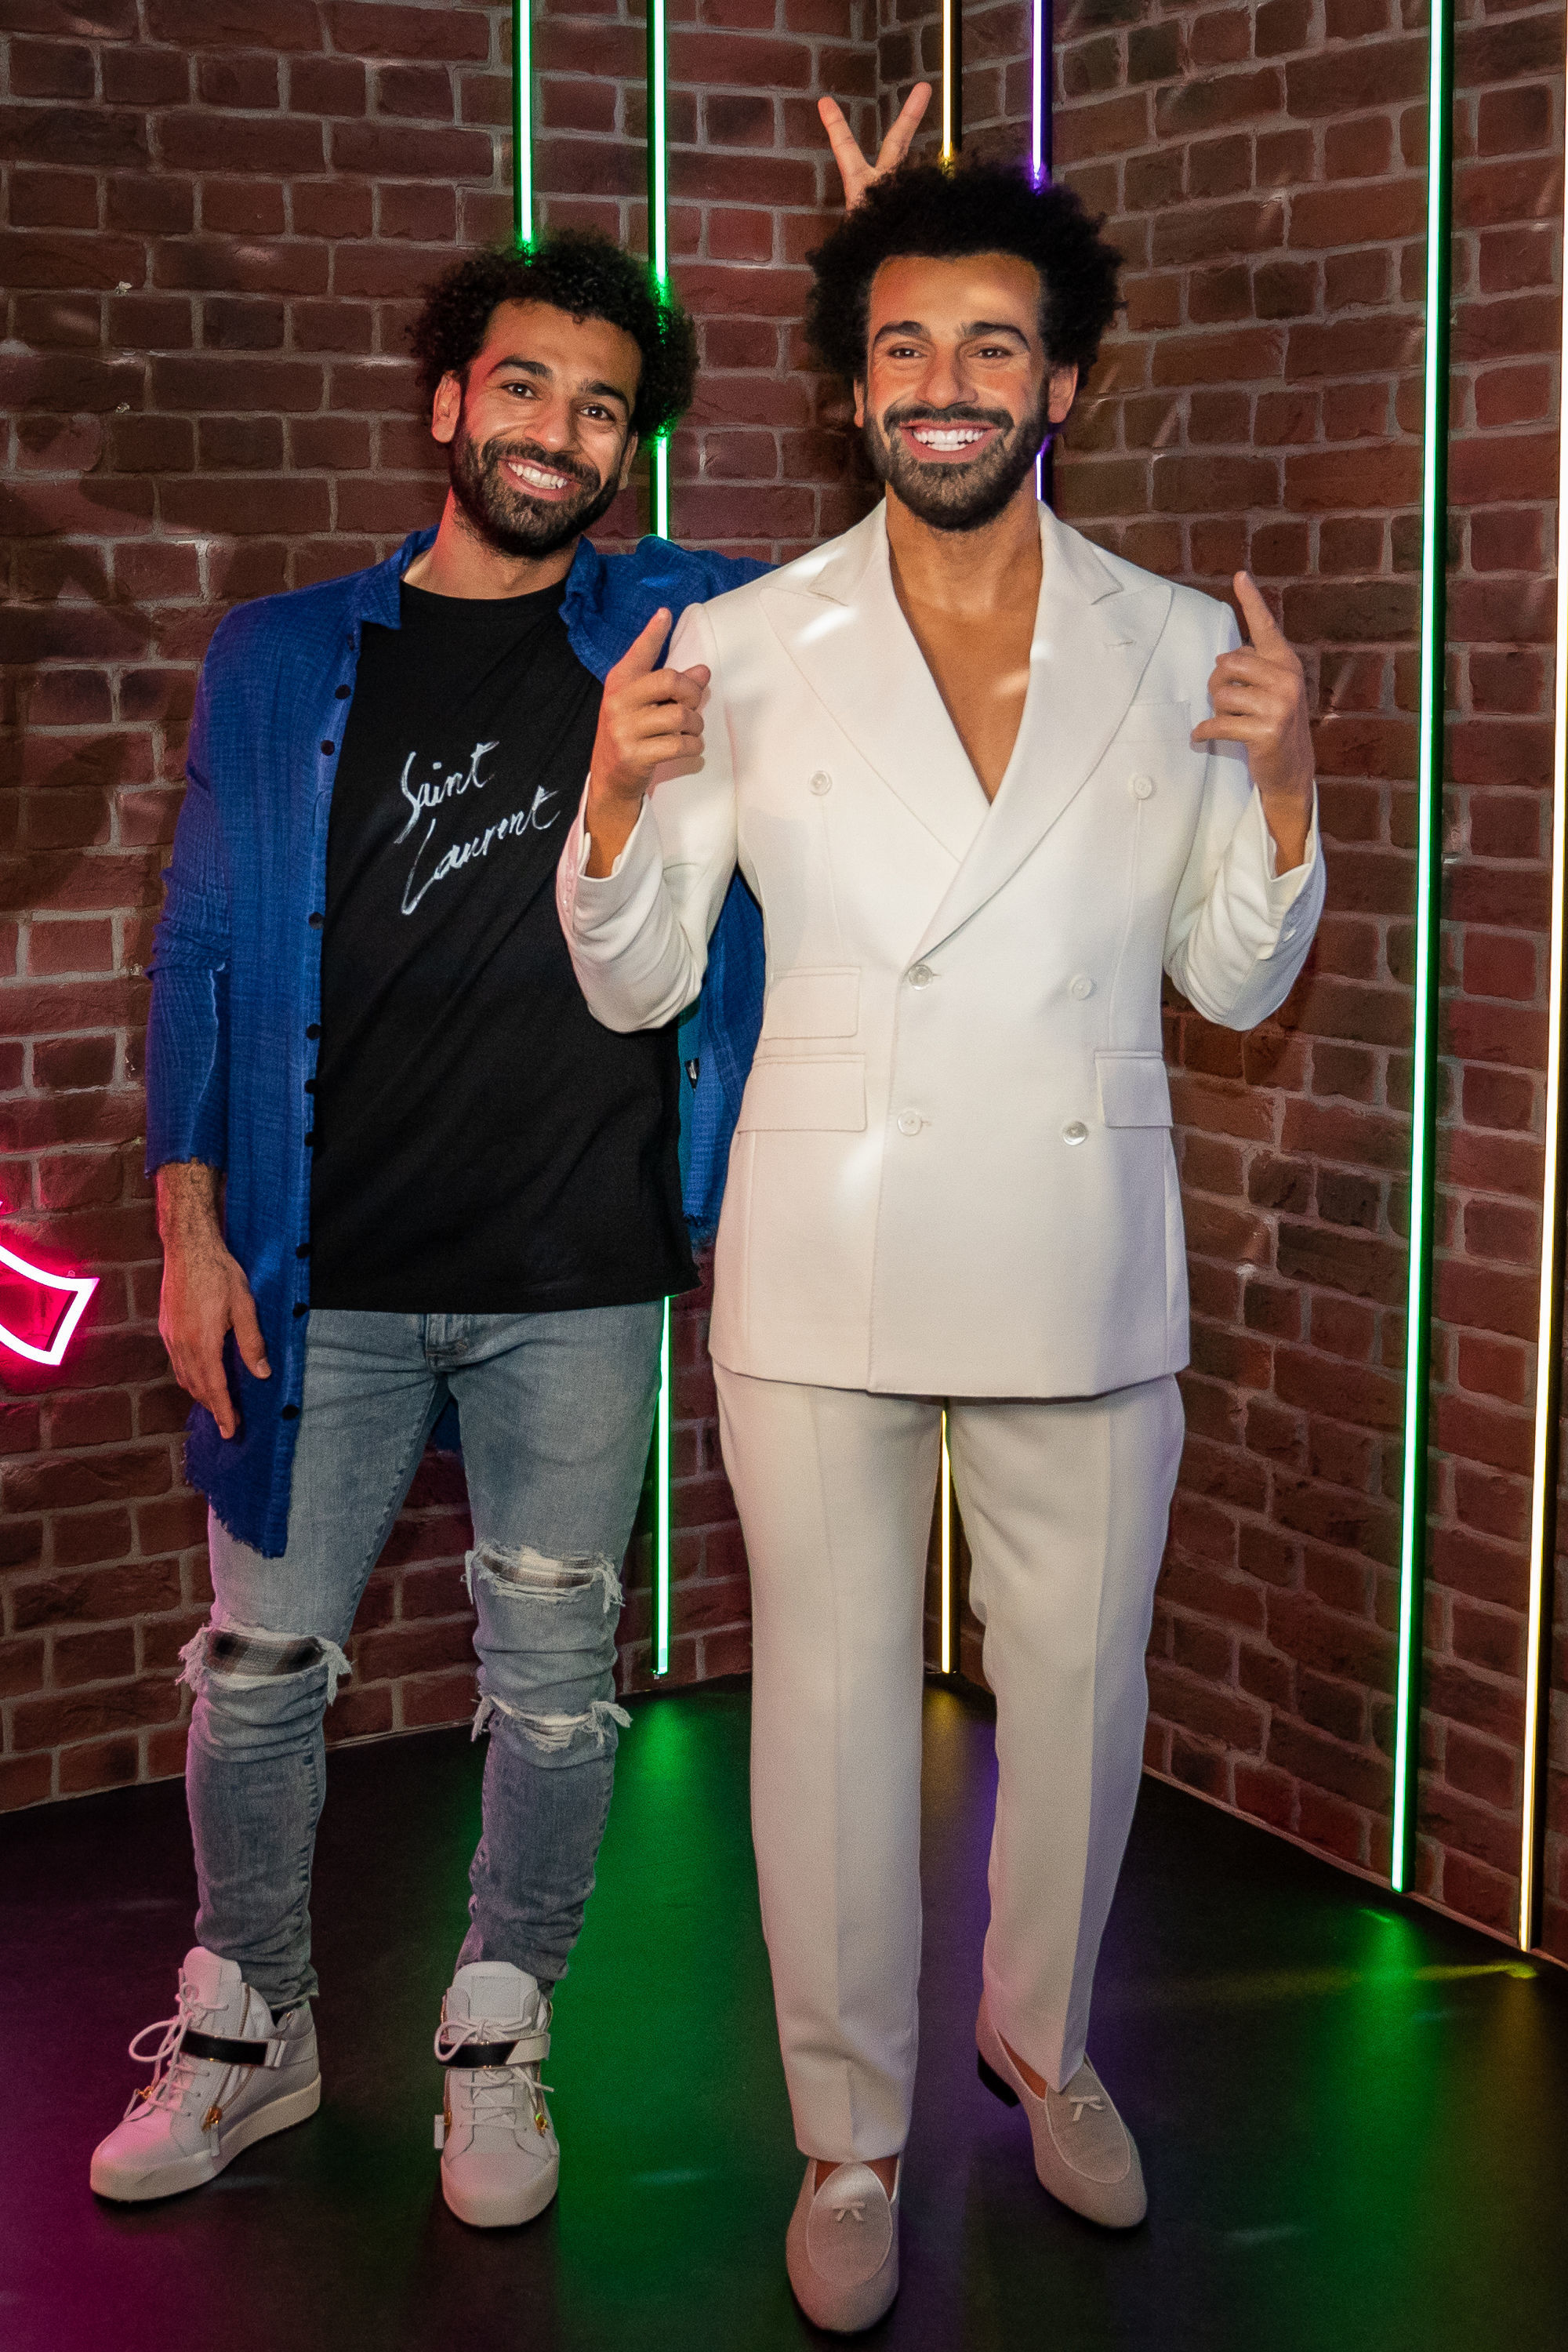 Salah enjoyed taking some funny pictures with his waxwork